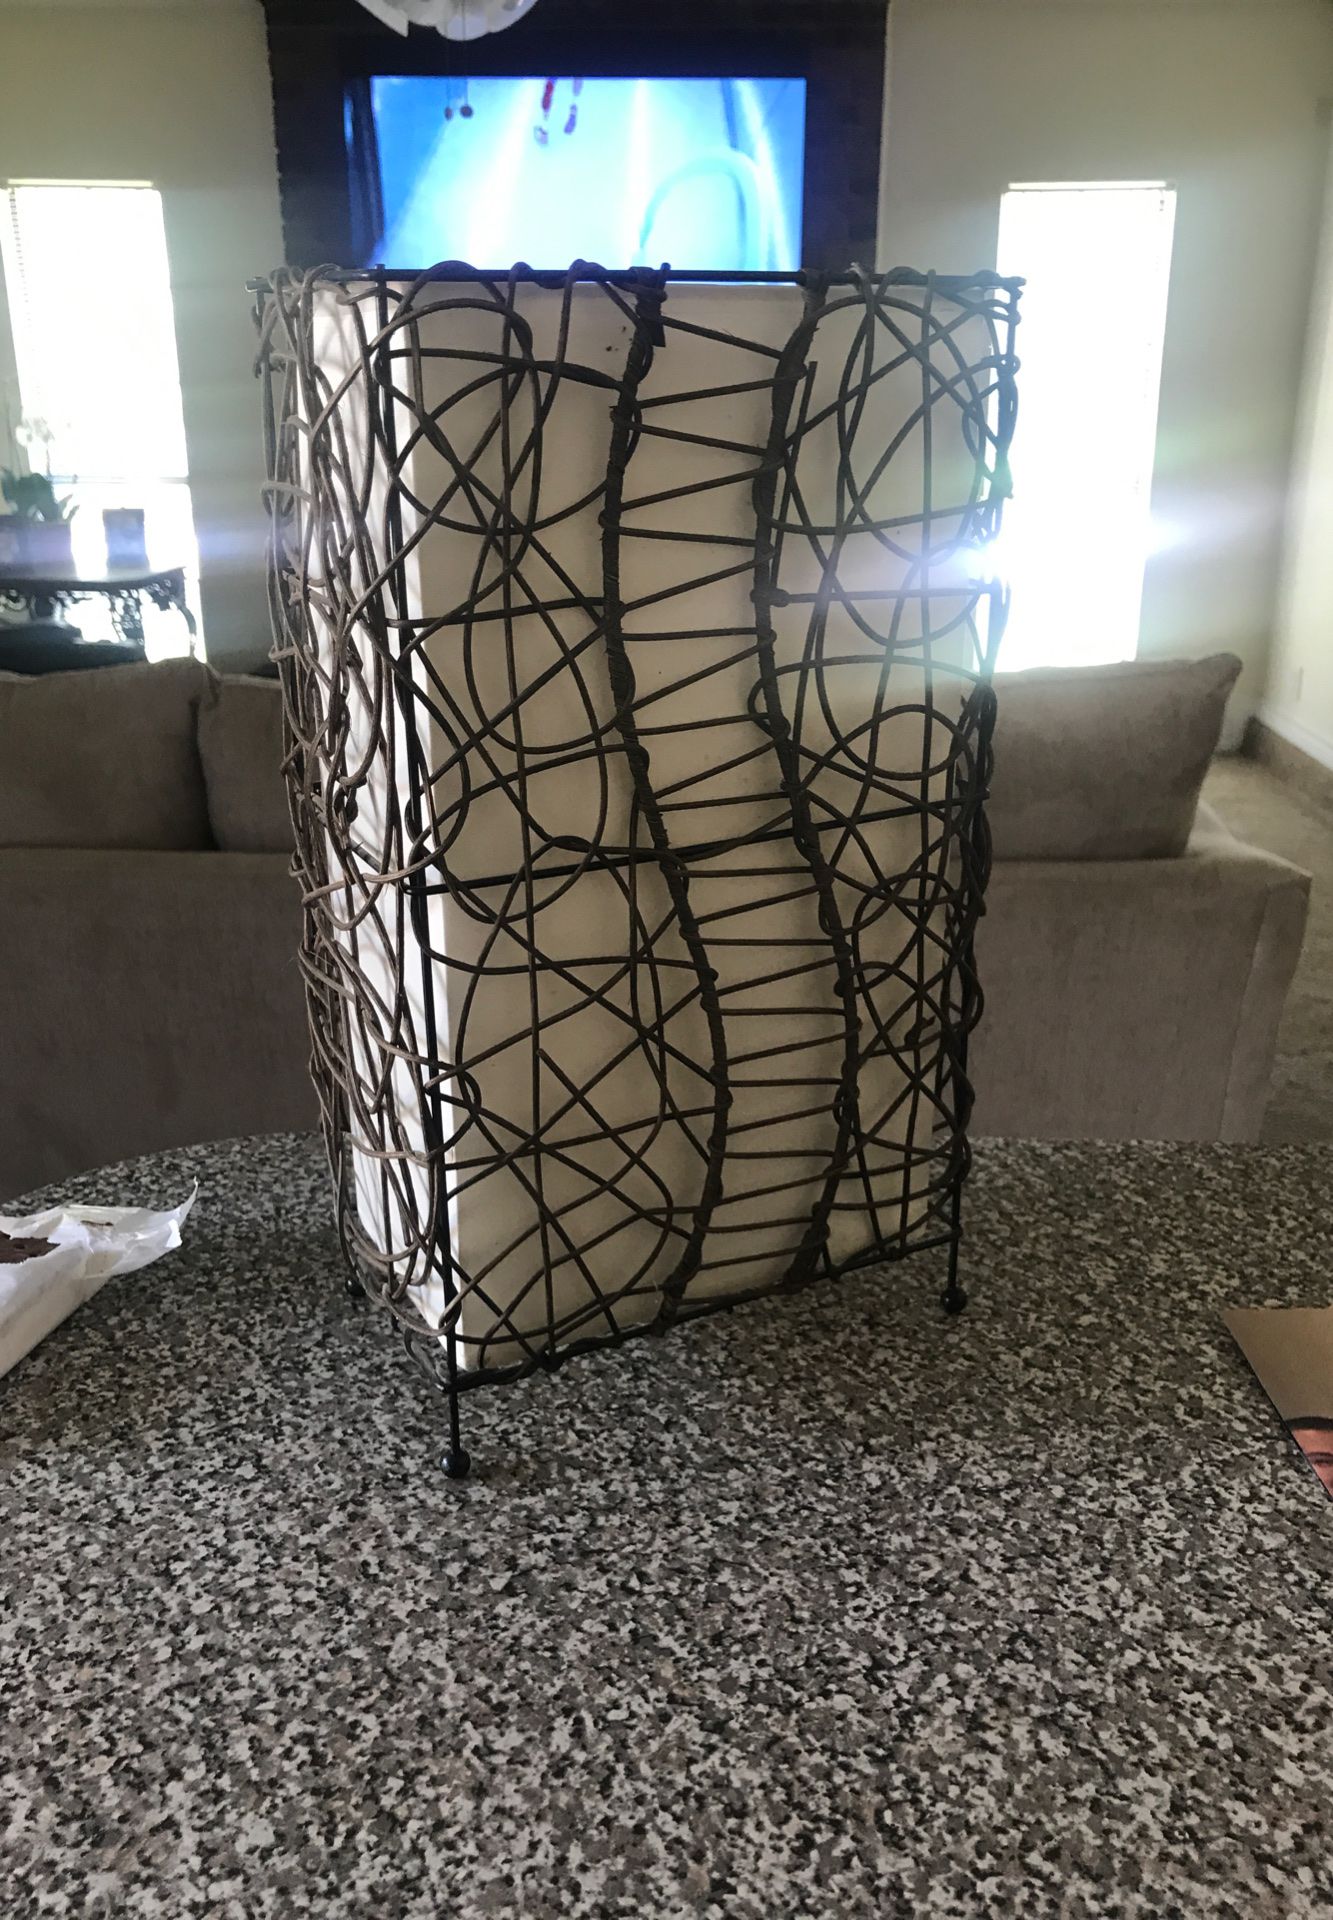 8”x14” Table lamp